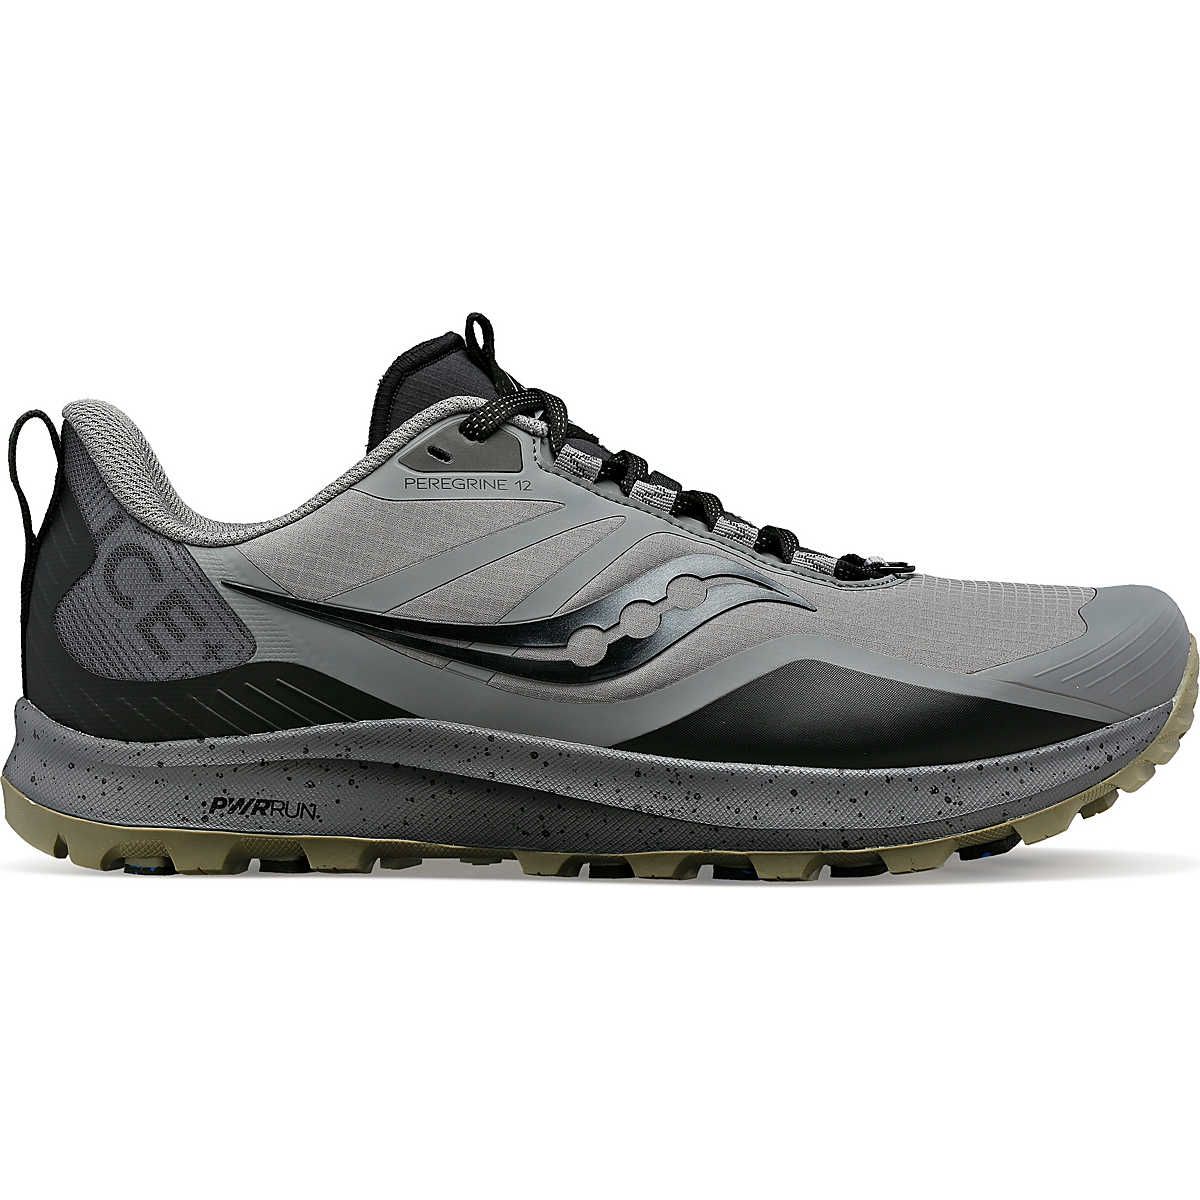 Saucony Men's Peregrine ICE+ 3 Trail Running shoes | SportChek